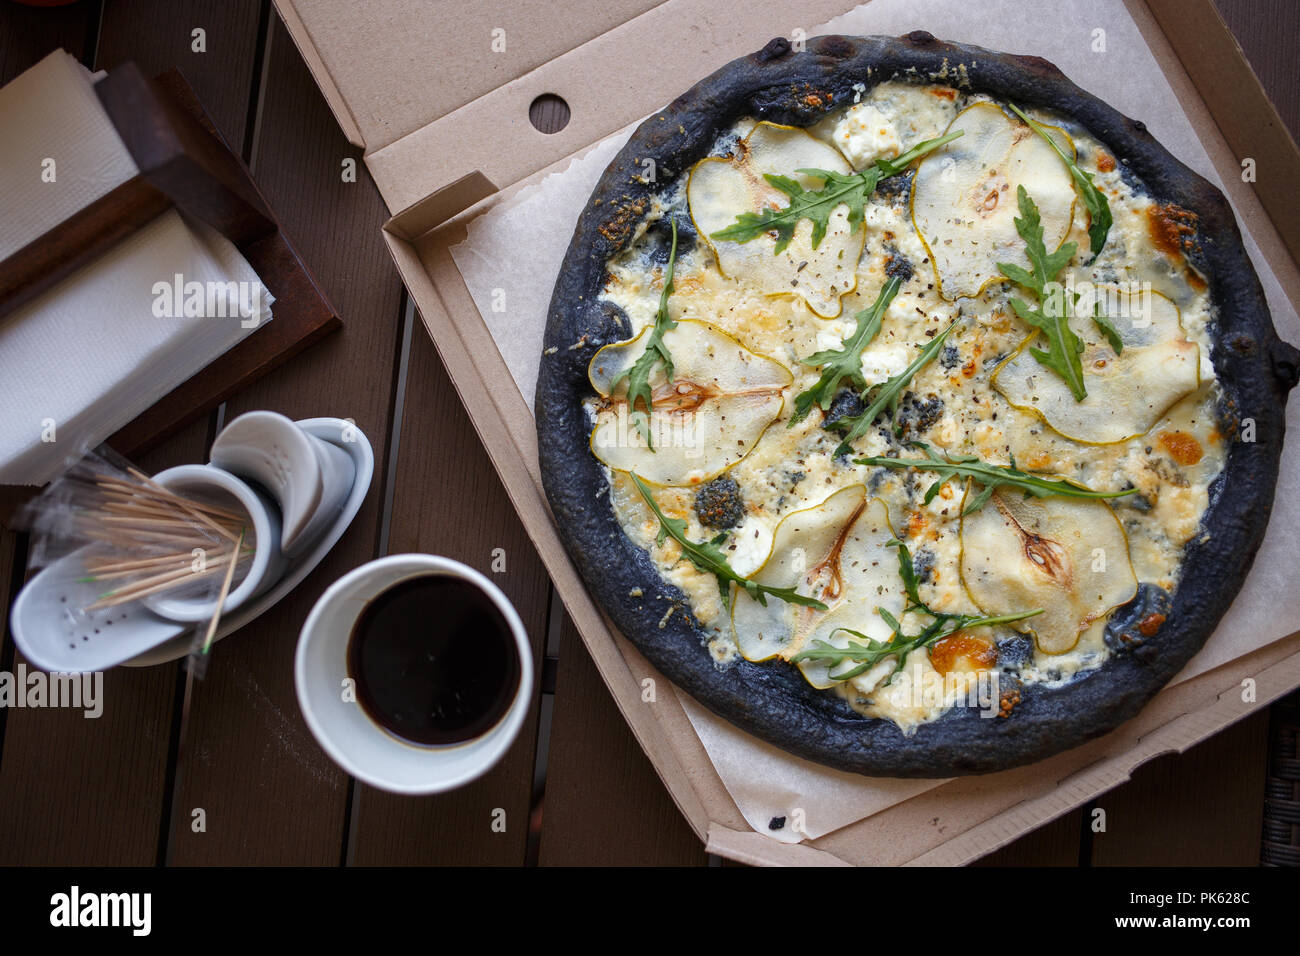 Black pizza four cheese with coffee top view image Stock Photo